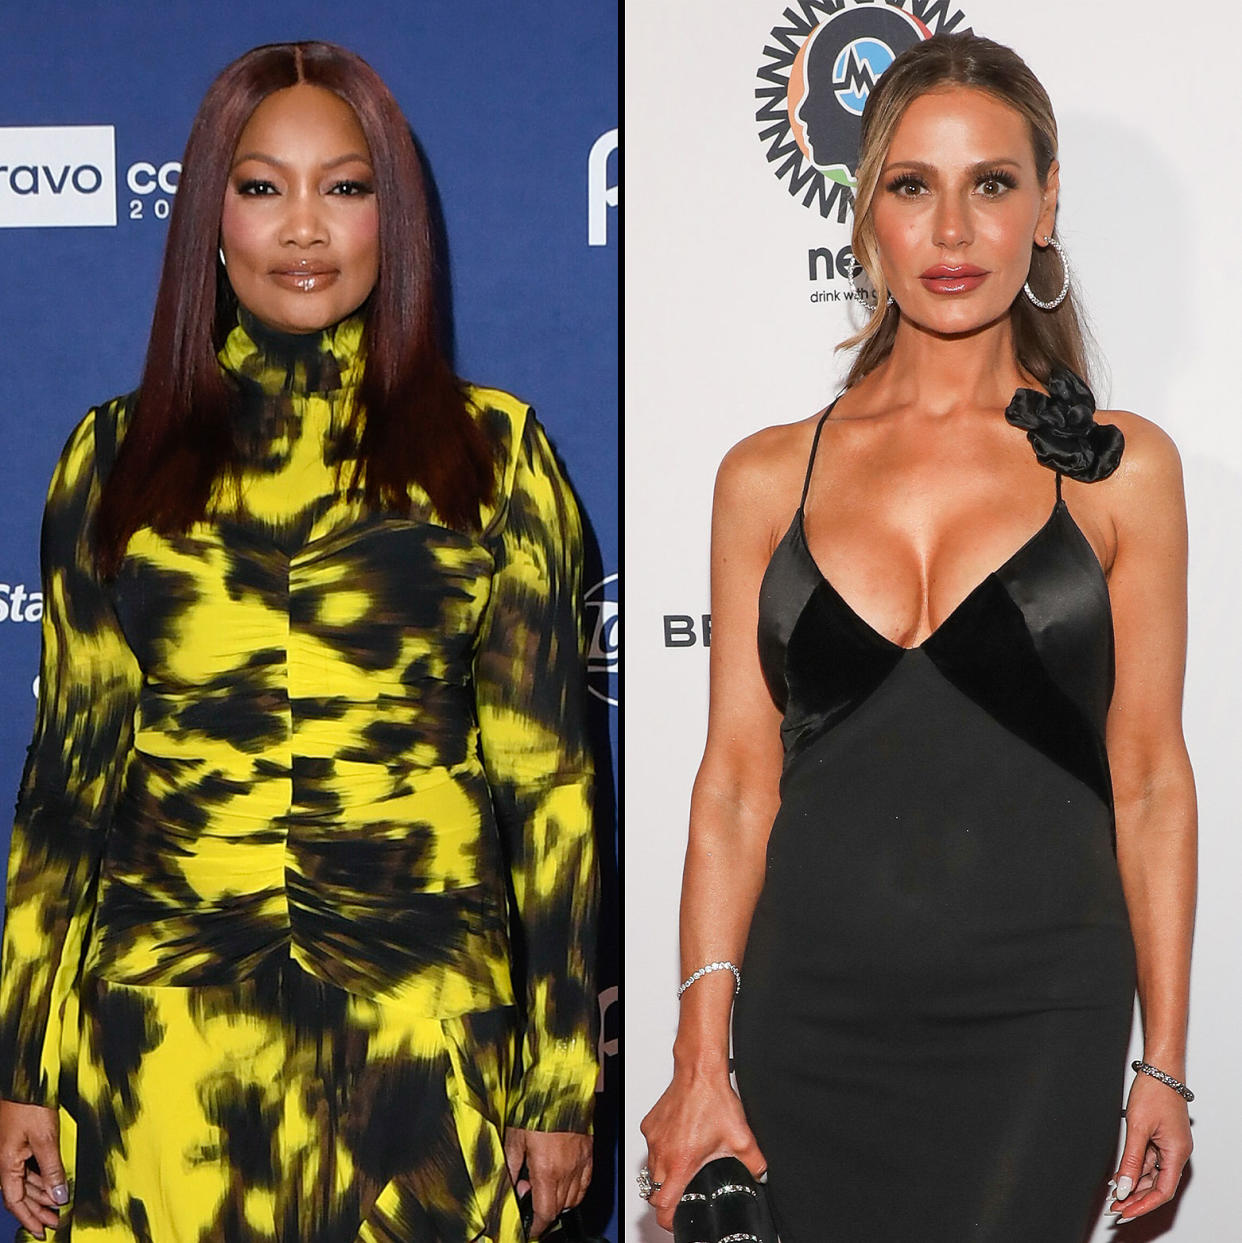 RHOBHs Garcelle Beauvais Claims Dorit Kemsley Still Had Jewelry After Robbery in Shady Comment